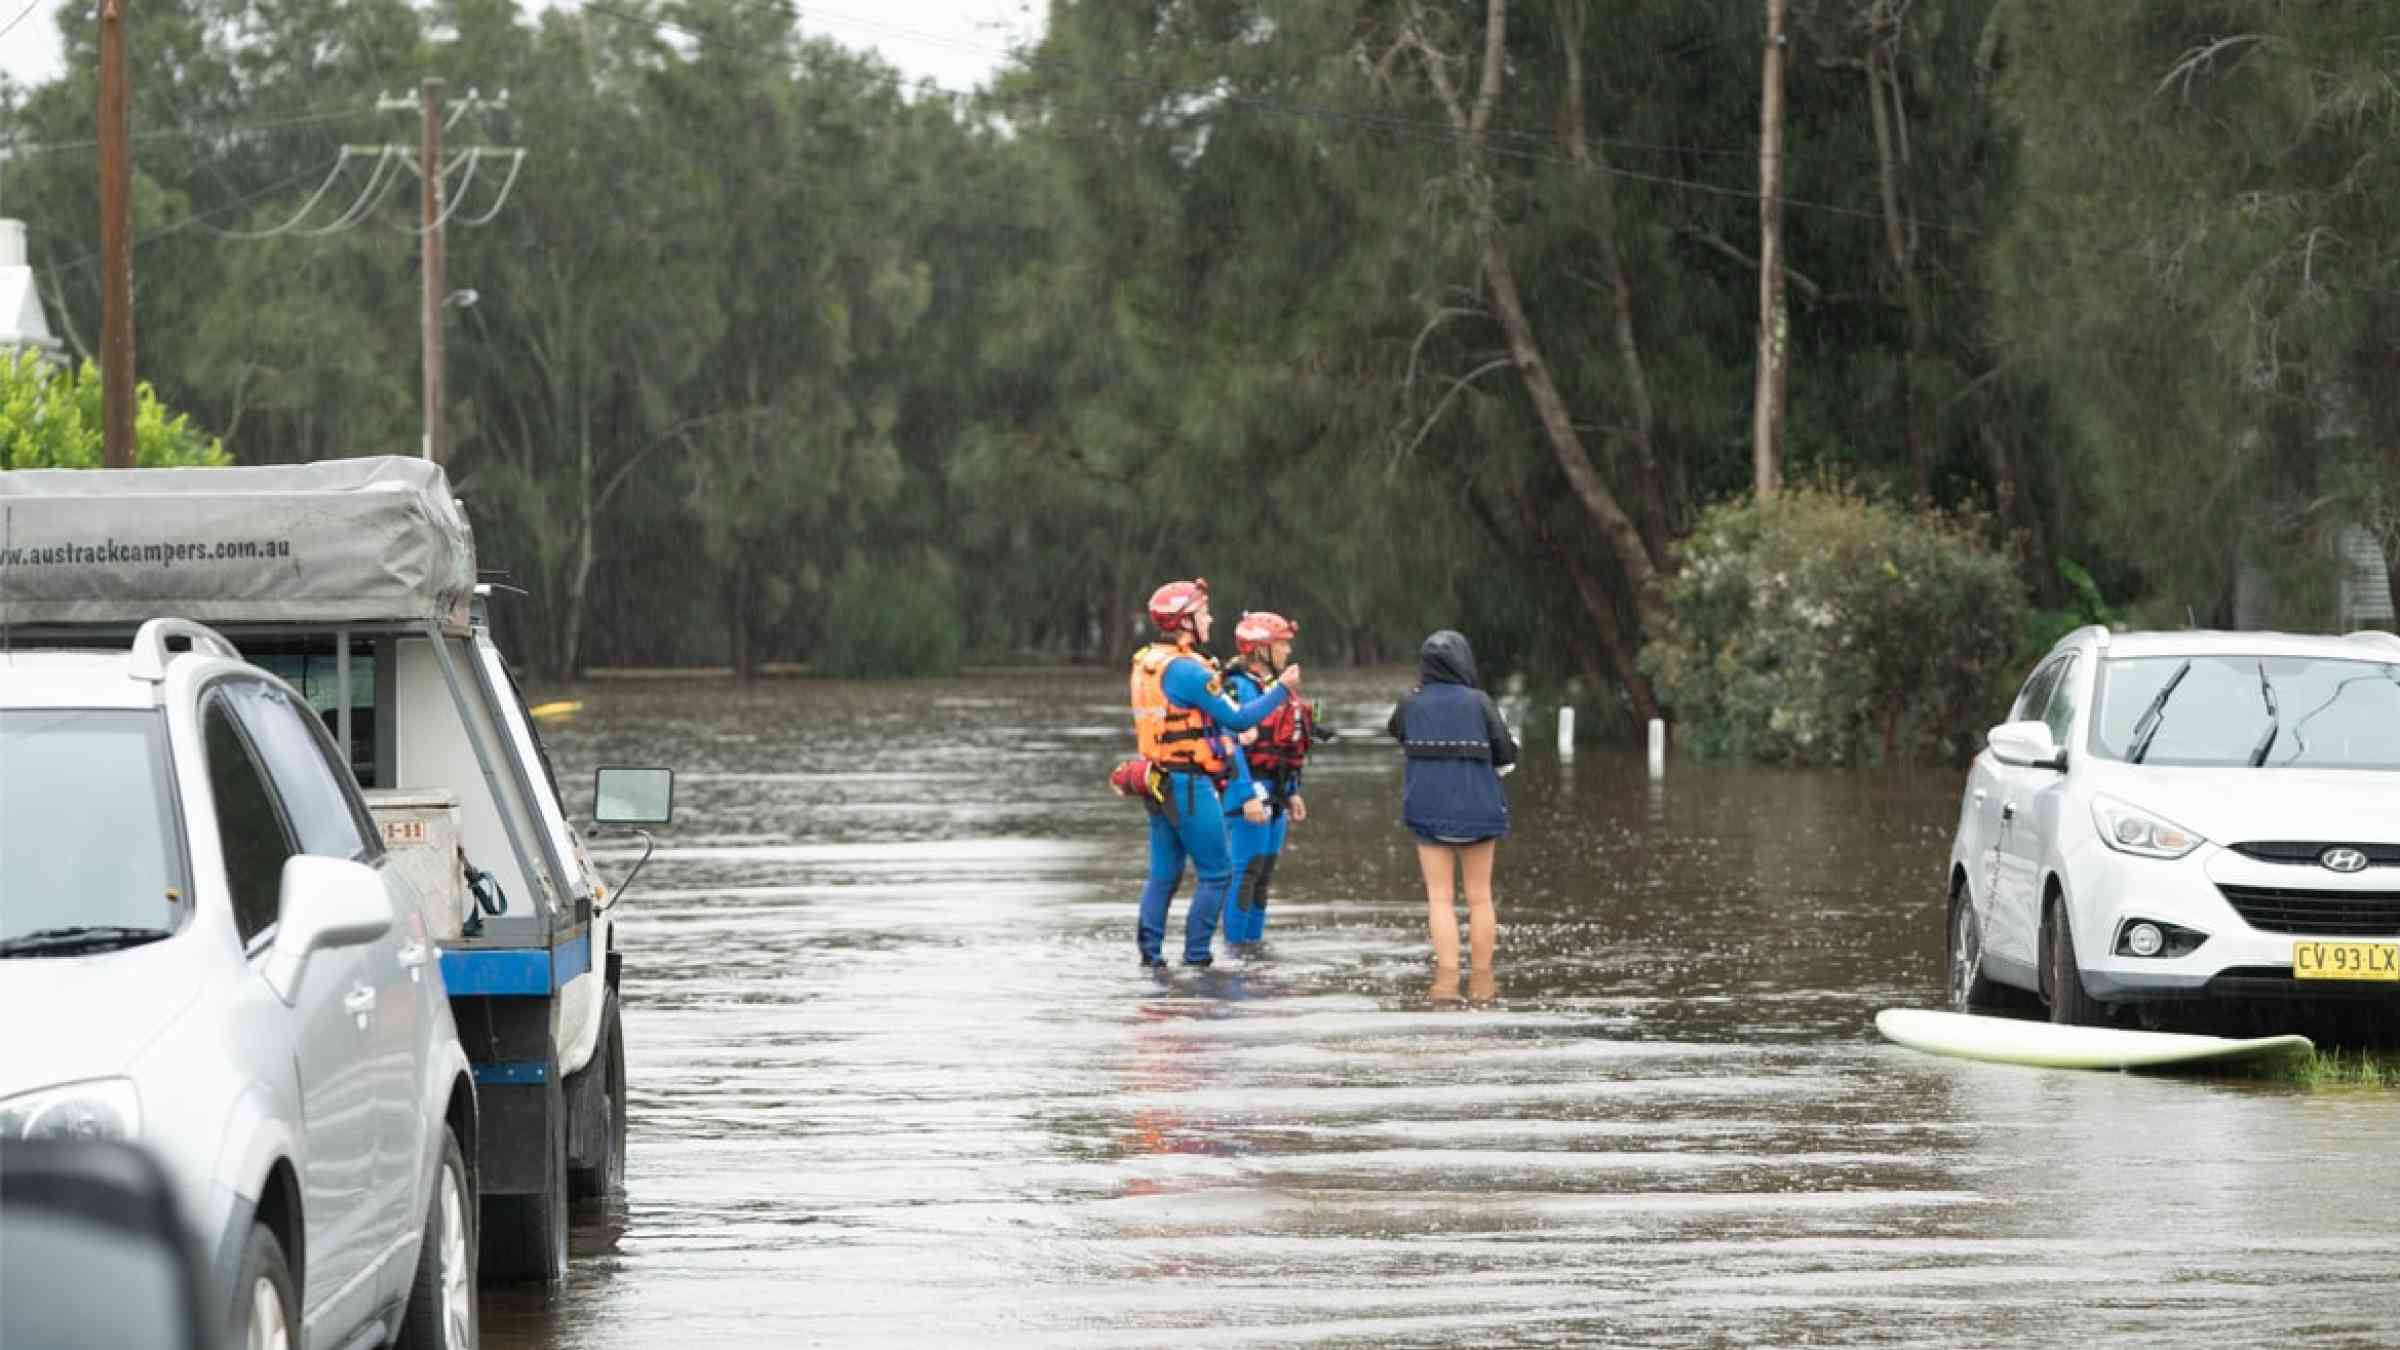 State Emergency Service (SES) respond to a flooding event in residential street in Killarney Valley, Australia (2021)